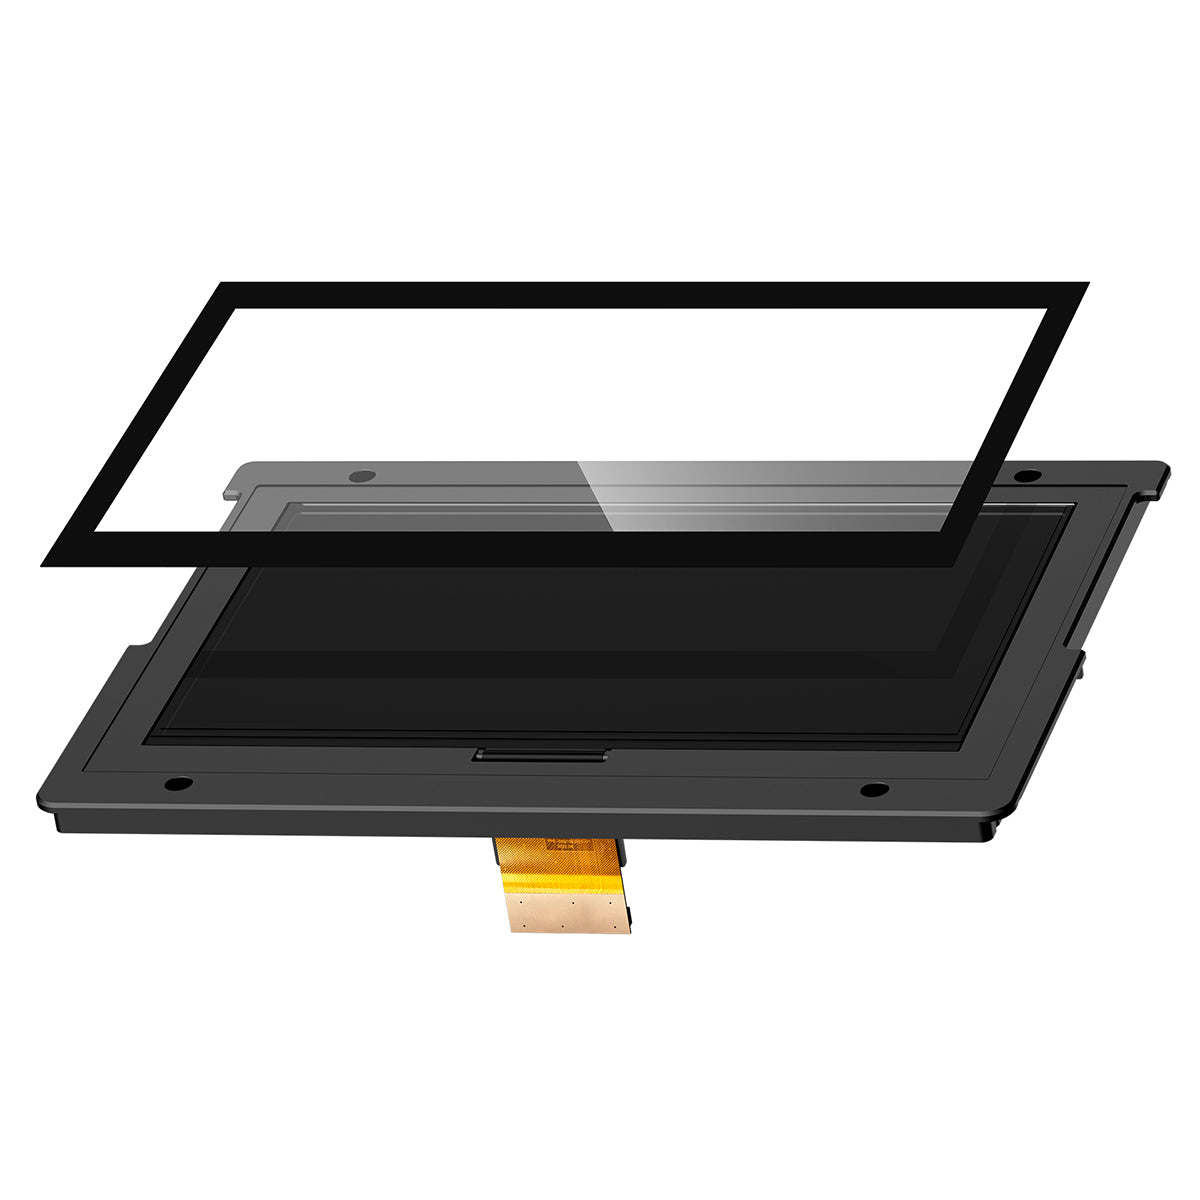 Uniformation 10.1in 5K LCD Screen Replacement for GKone – UniFormation 3D  Printer